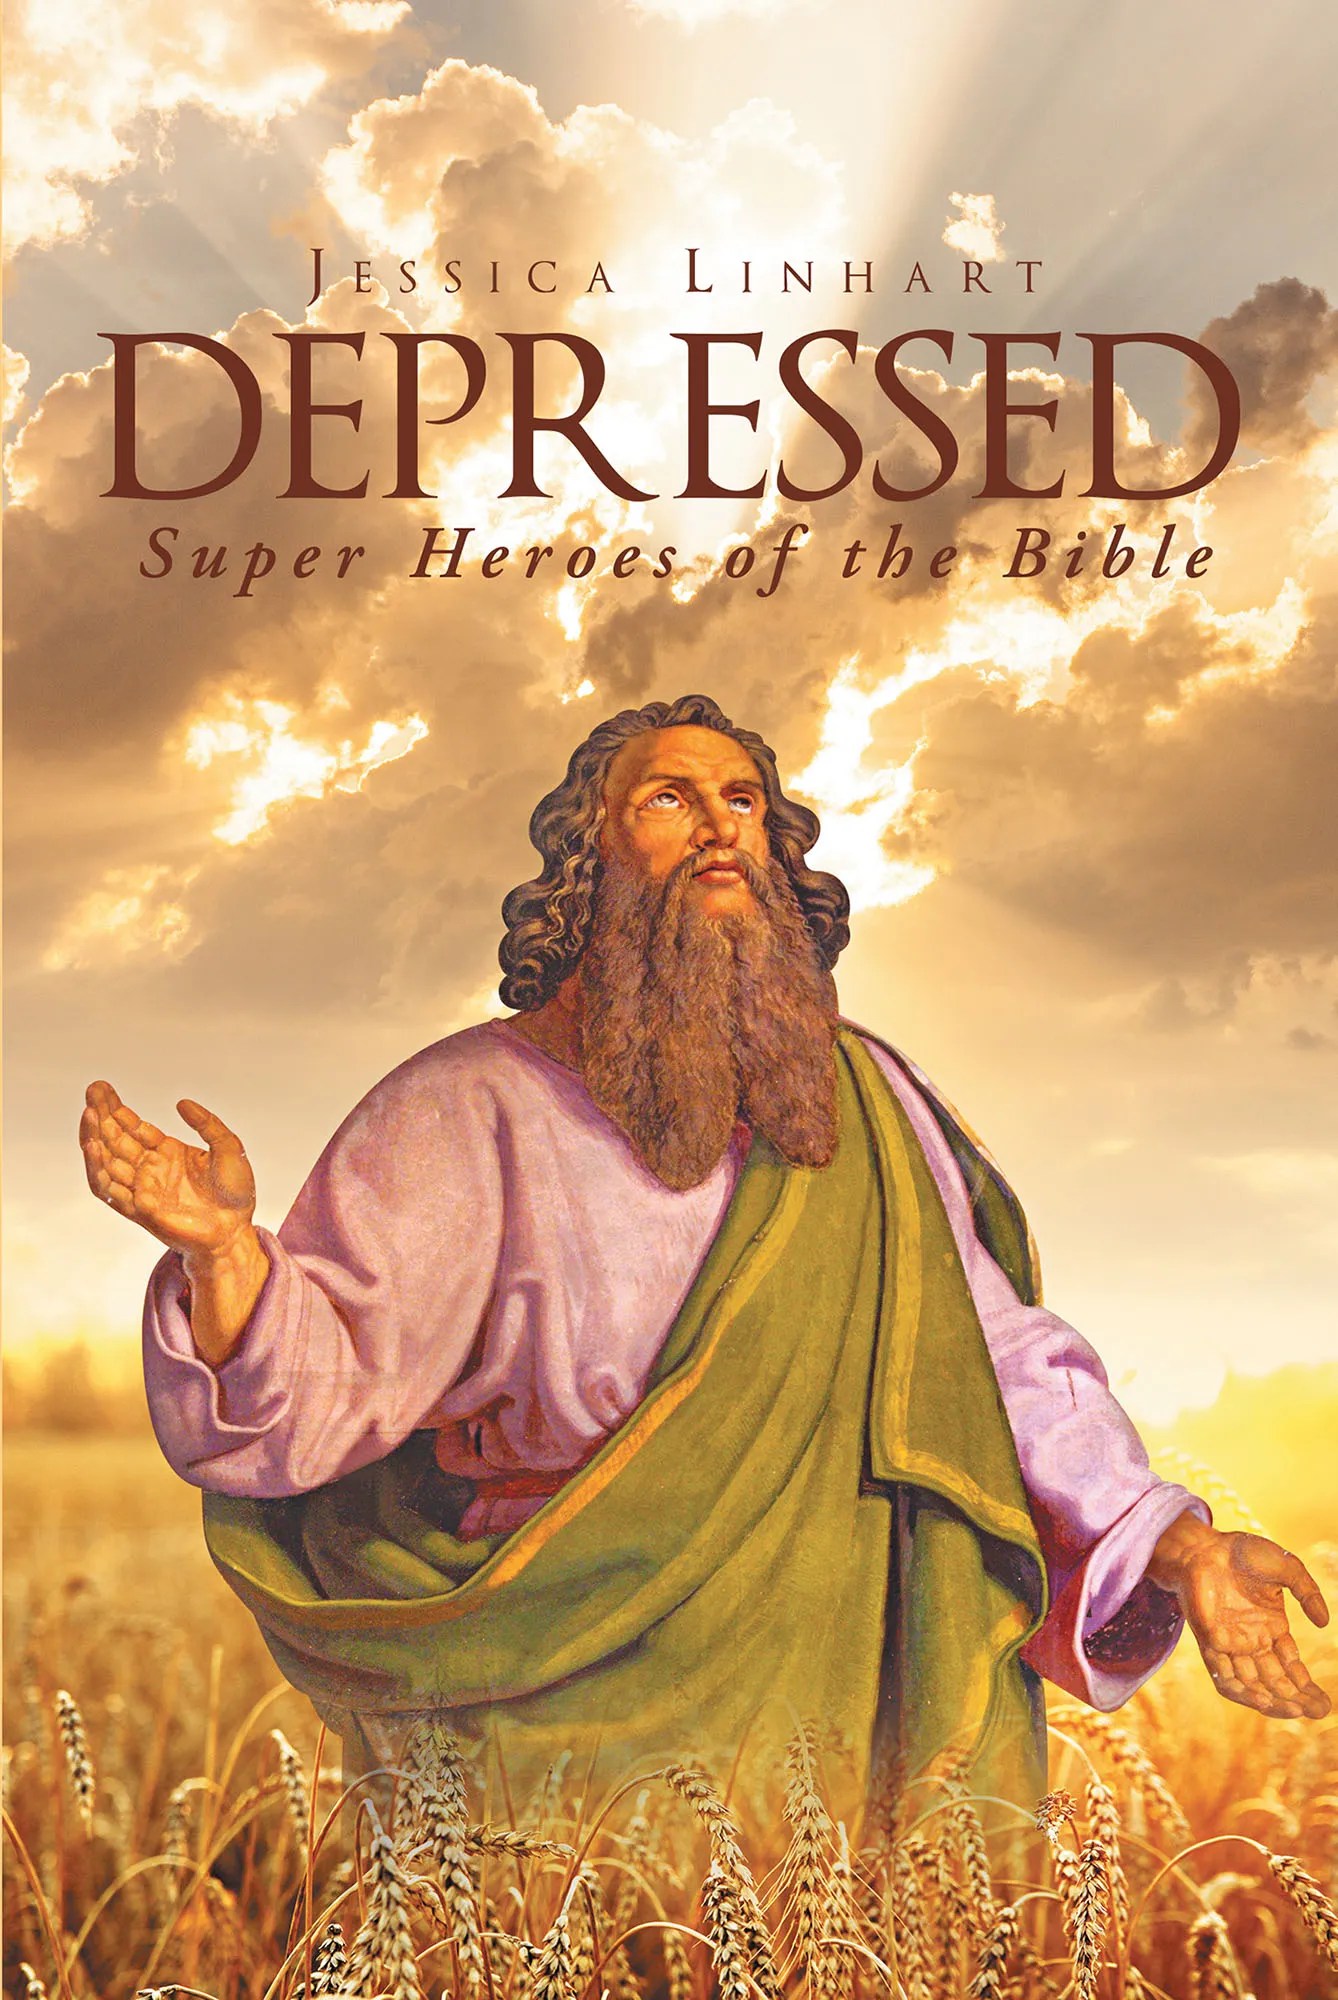 who in the bible was depressed